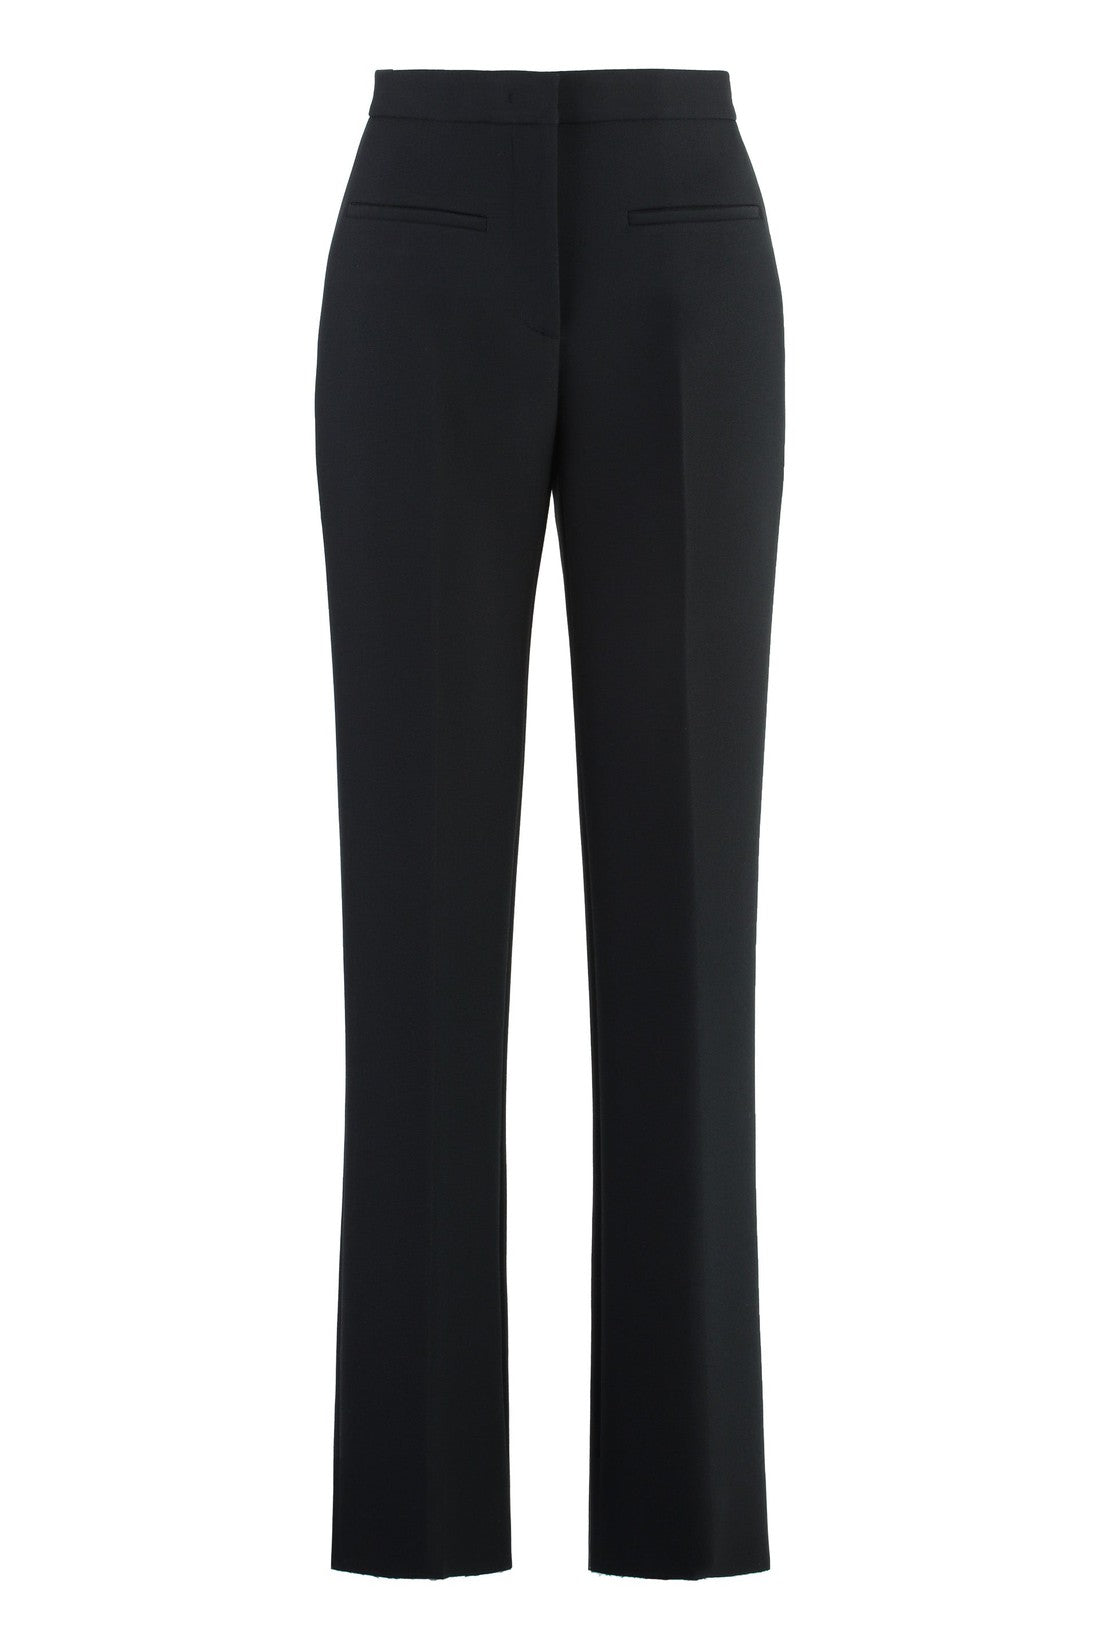 MSGM-OUTLET-SALE-Crêpe tailored trousers-ARCHIVIST